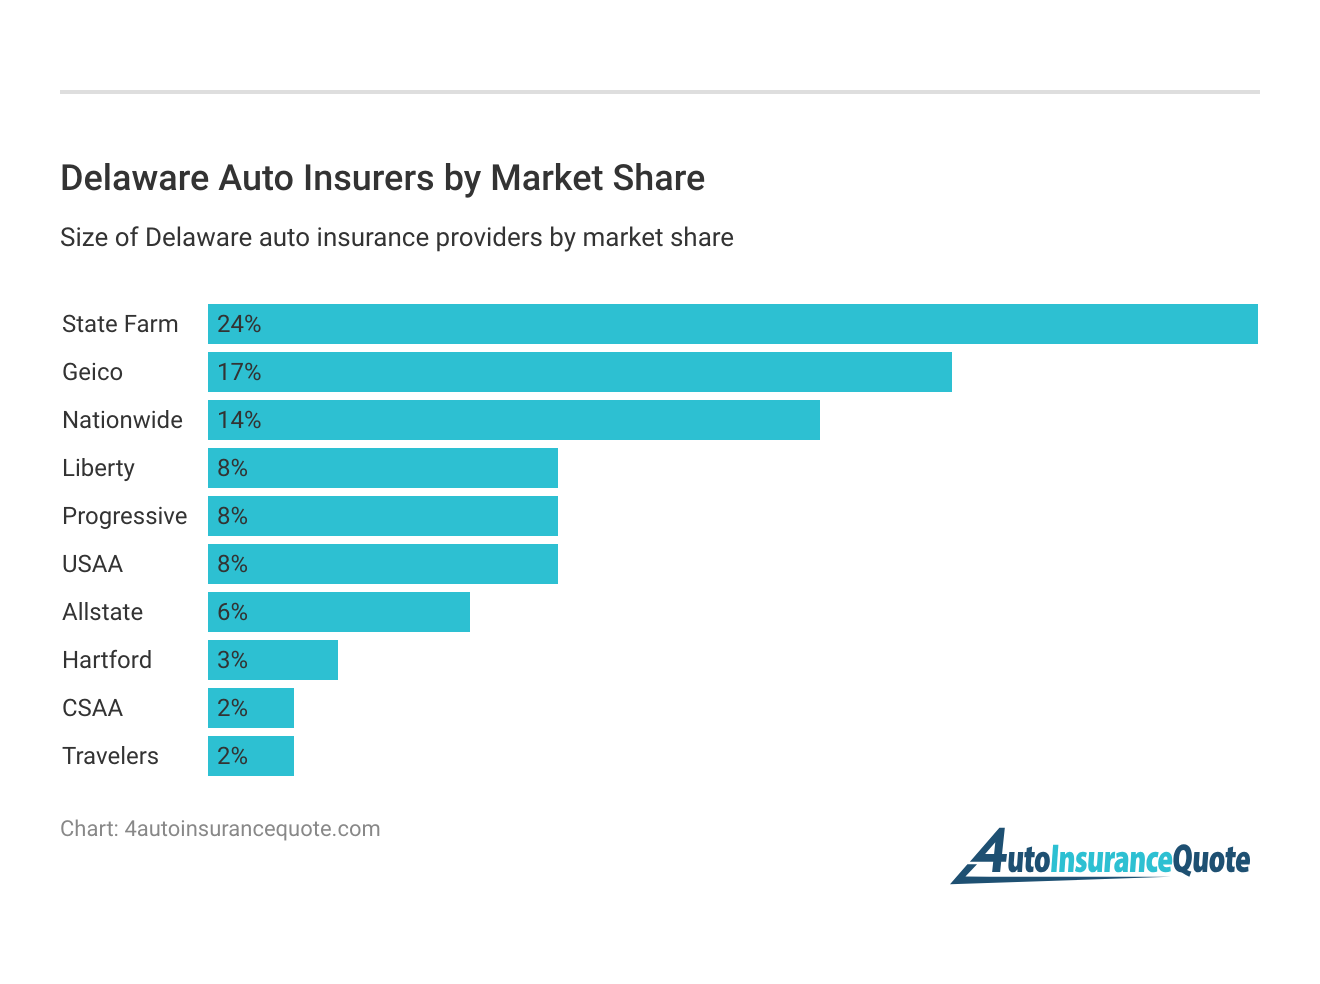 <h3>Delaware Auto Insurers by Market Share</h3>